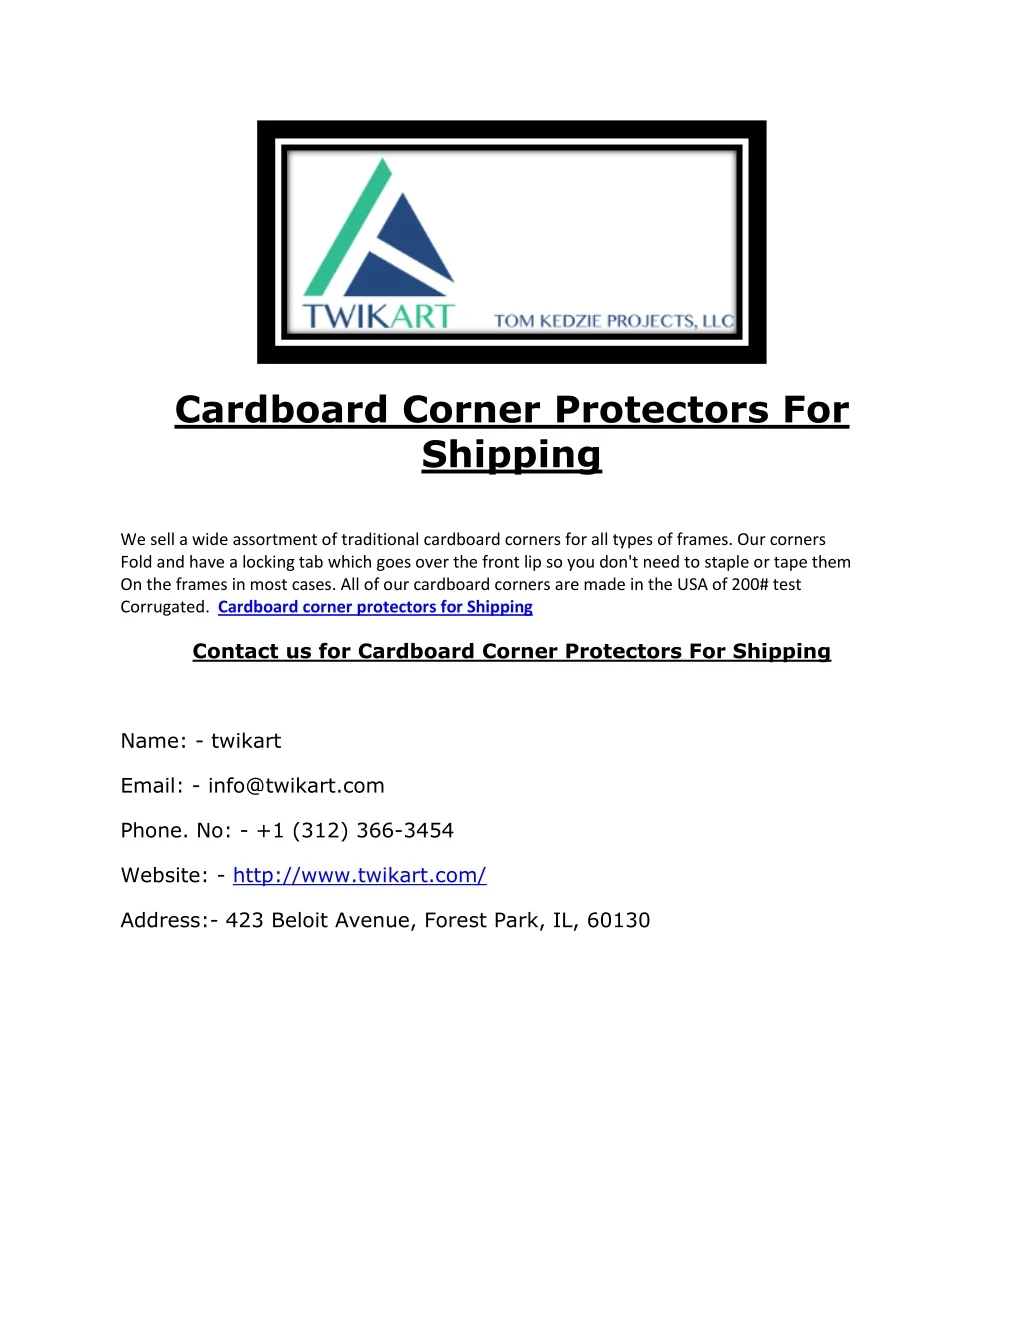 cardboard corner protectors for shipping we sell